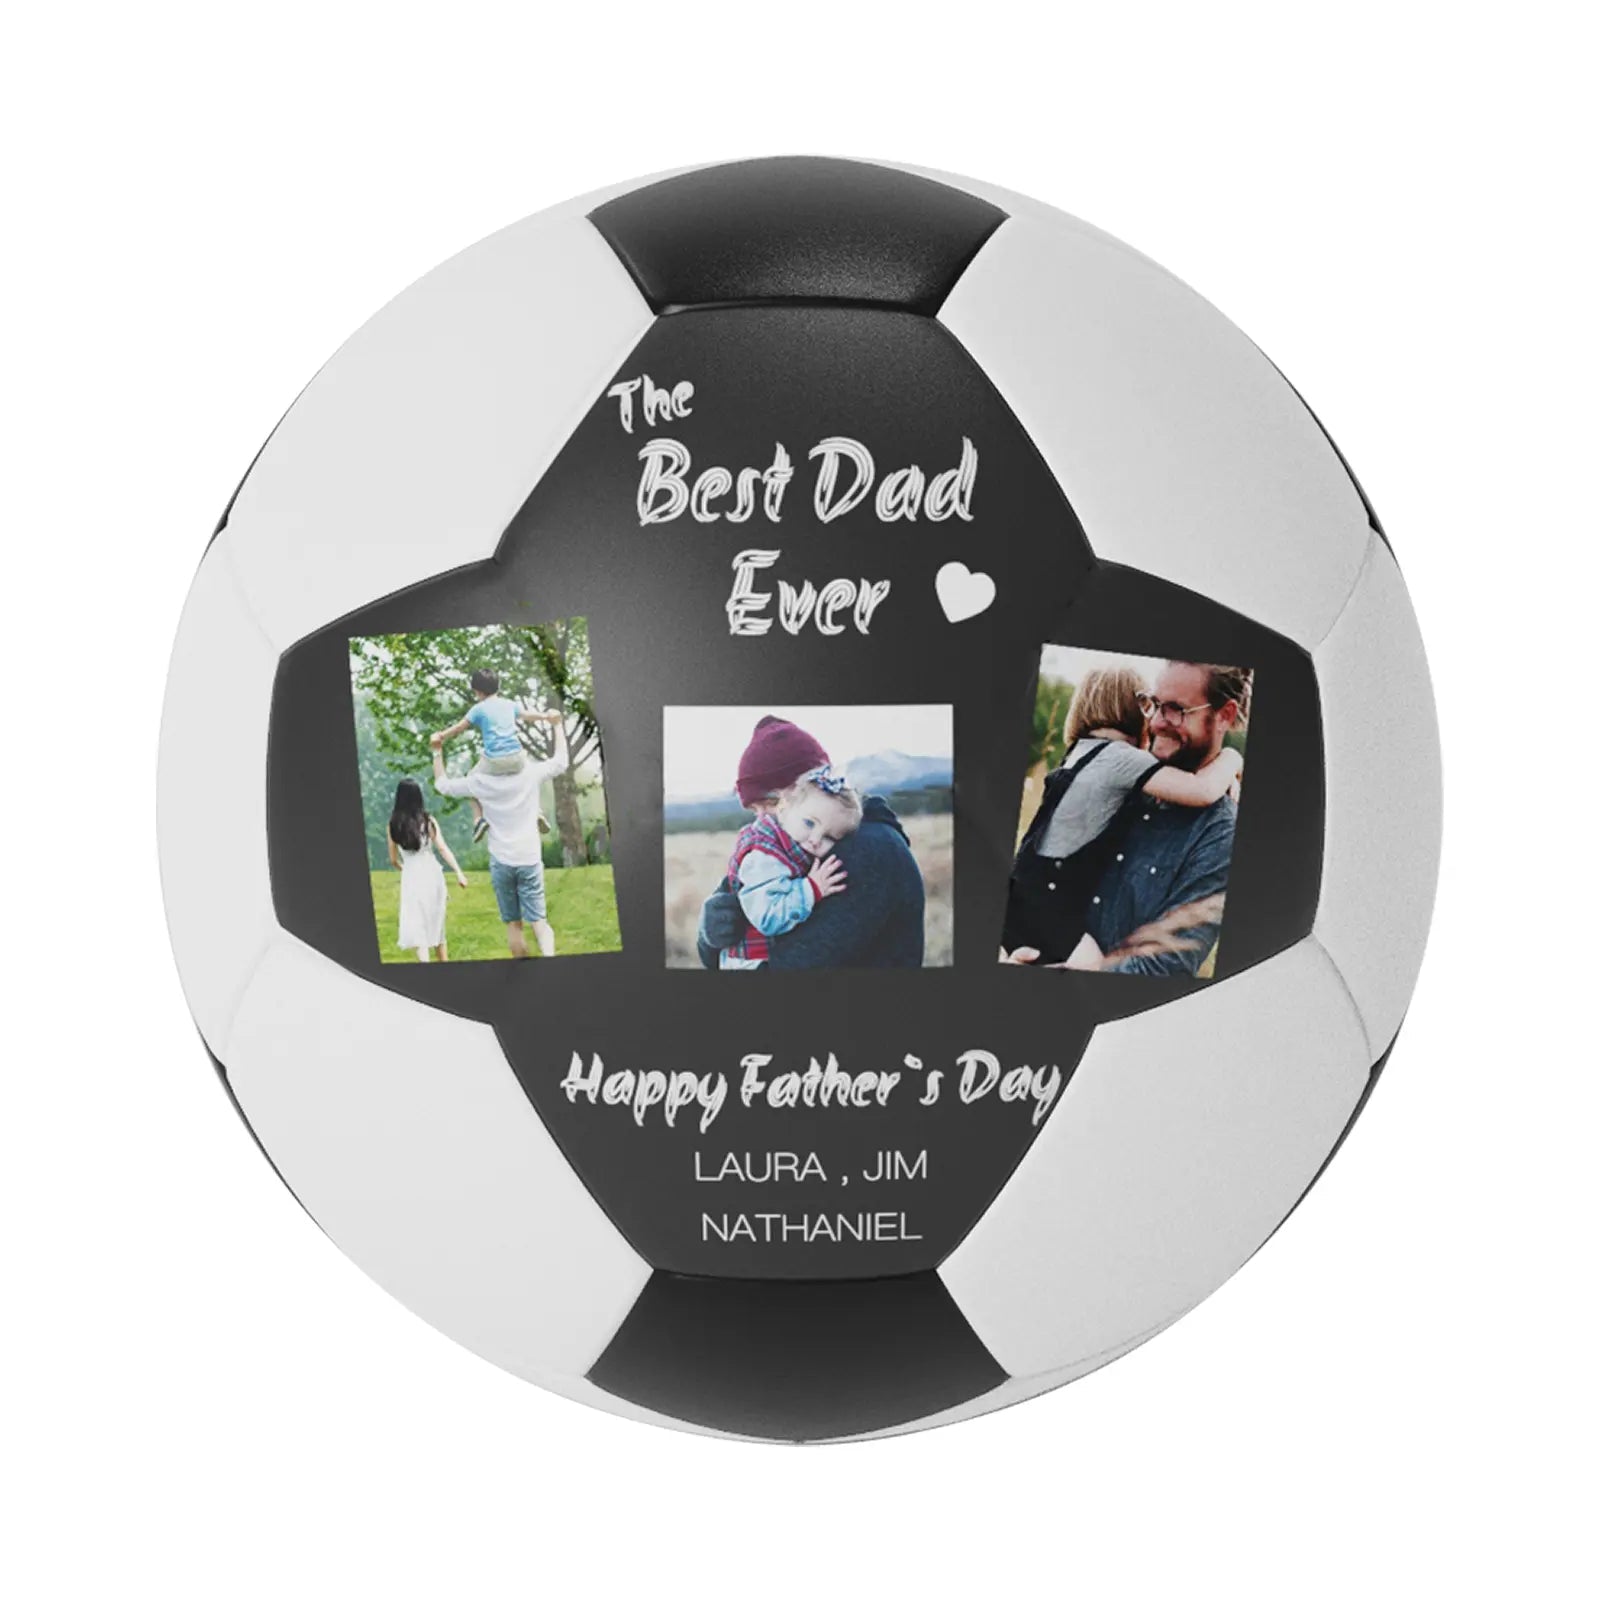 Personalized Custom Knight Photo Soccer Ball Gifts For Dad,Grandpa,Son,Grandson - Family Watchs